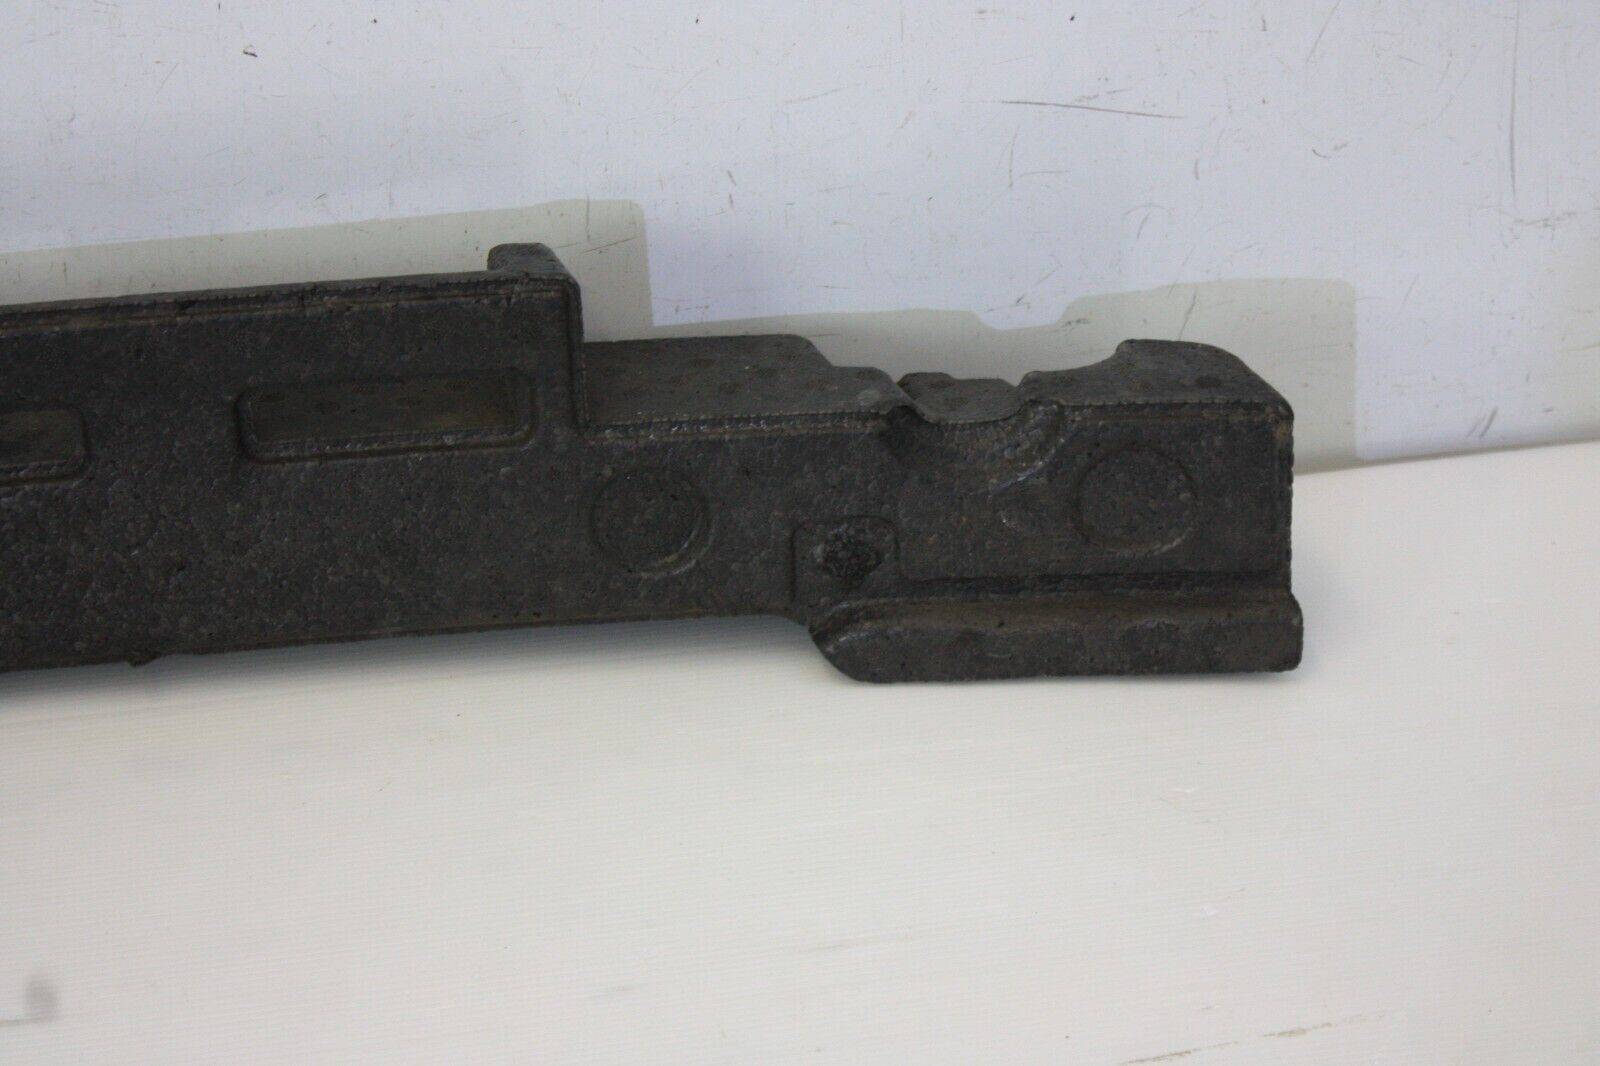 Toyota-Auris-Front-Bumper-Impact-Absorber-52611-02260B-Genuine-175611739428-9